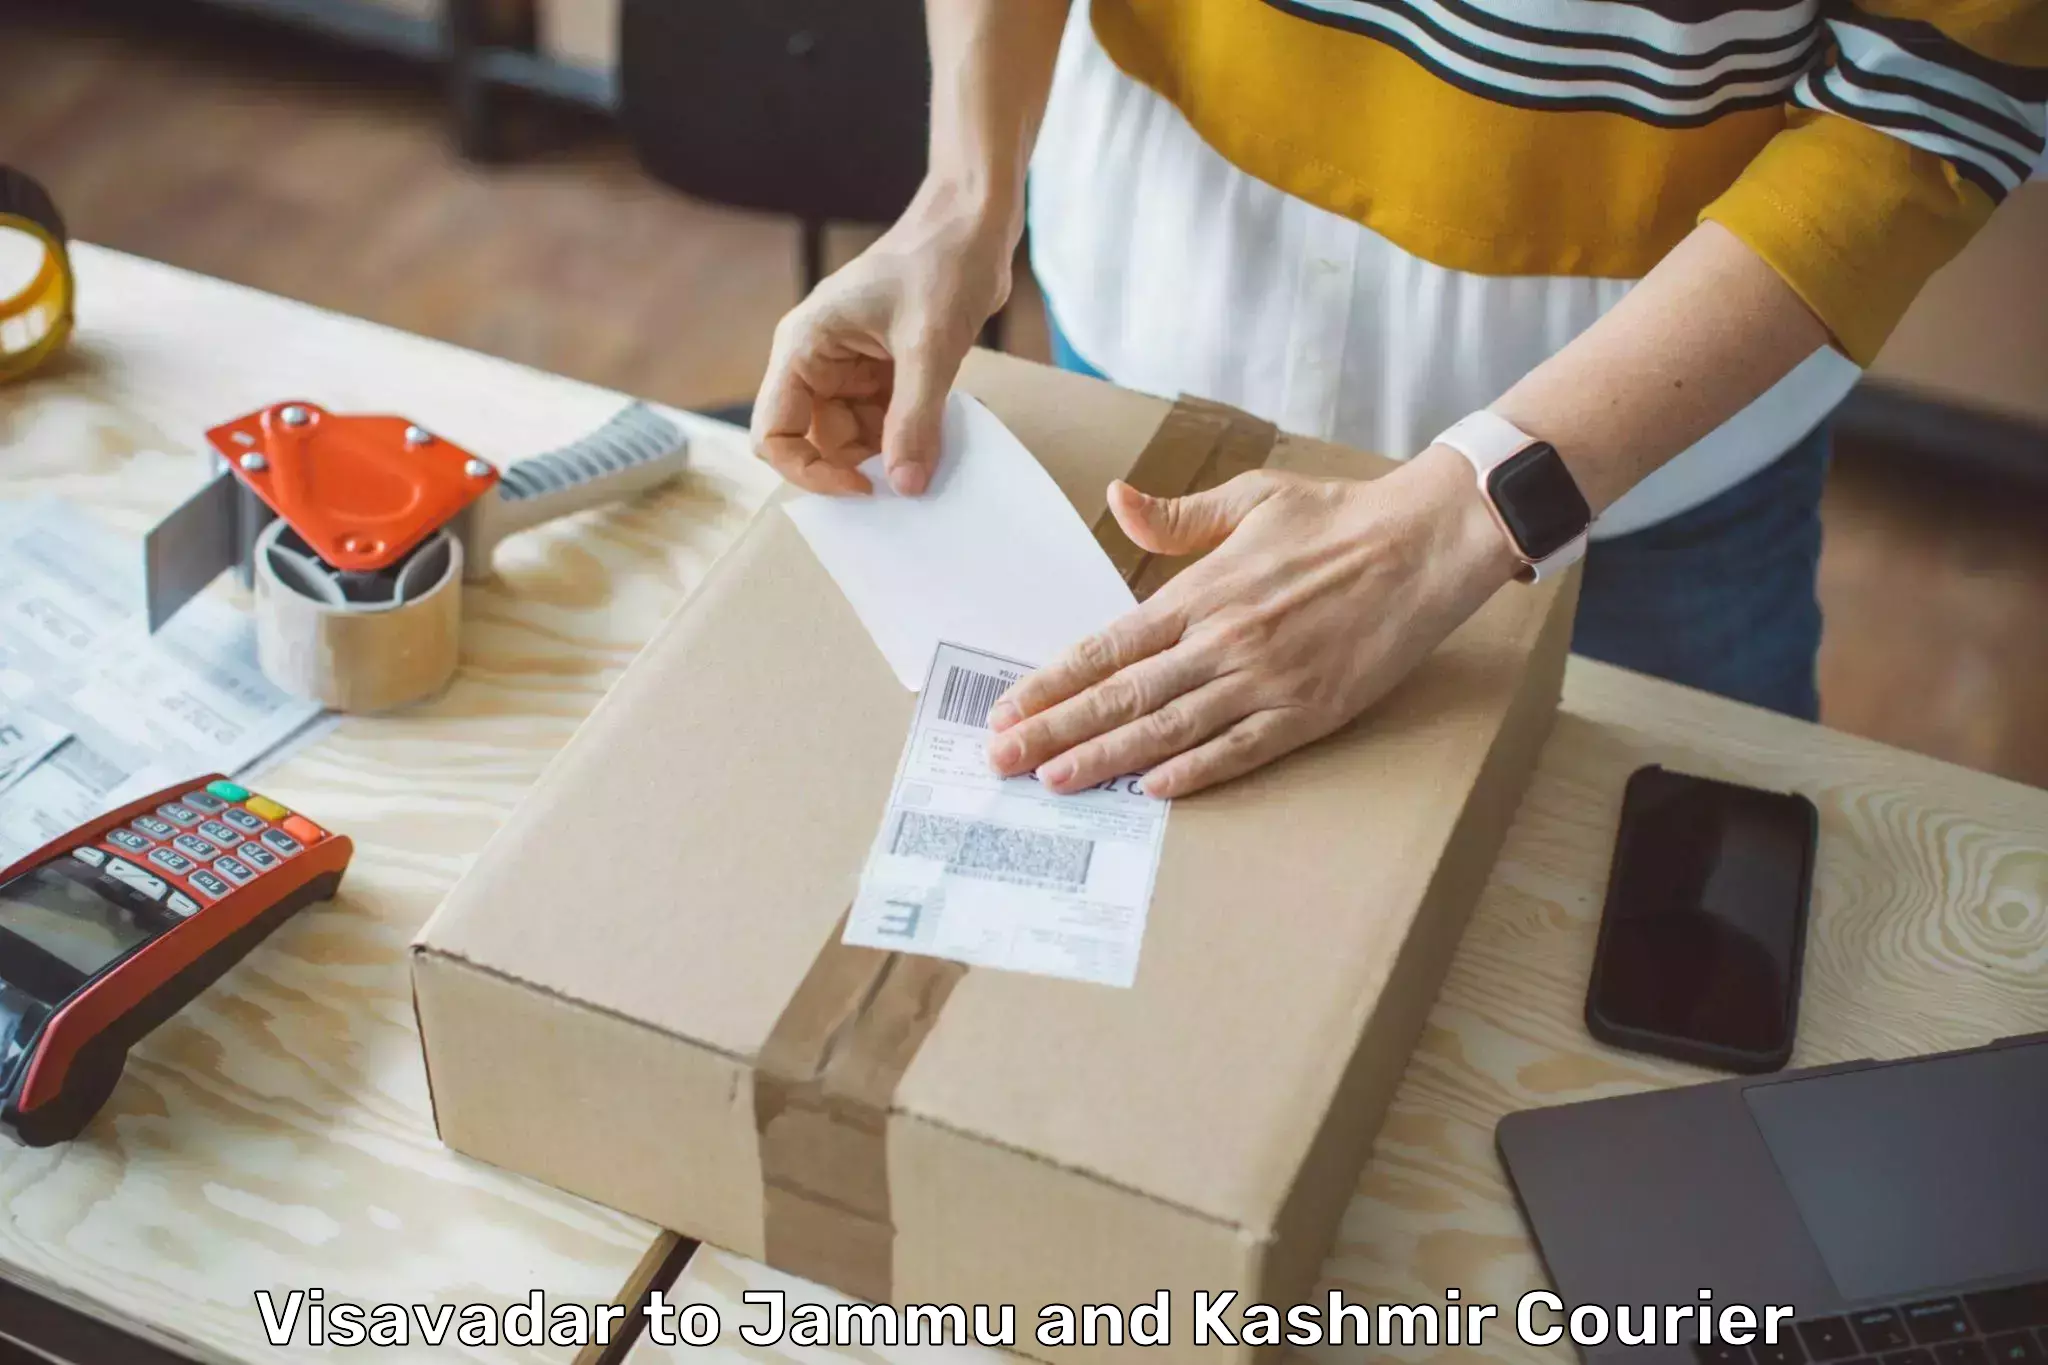 Local delivery service Visavadar to Jammu and Kashmir